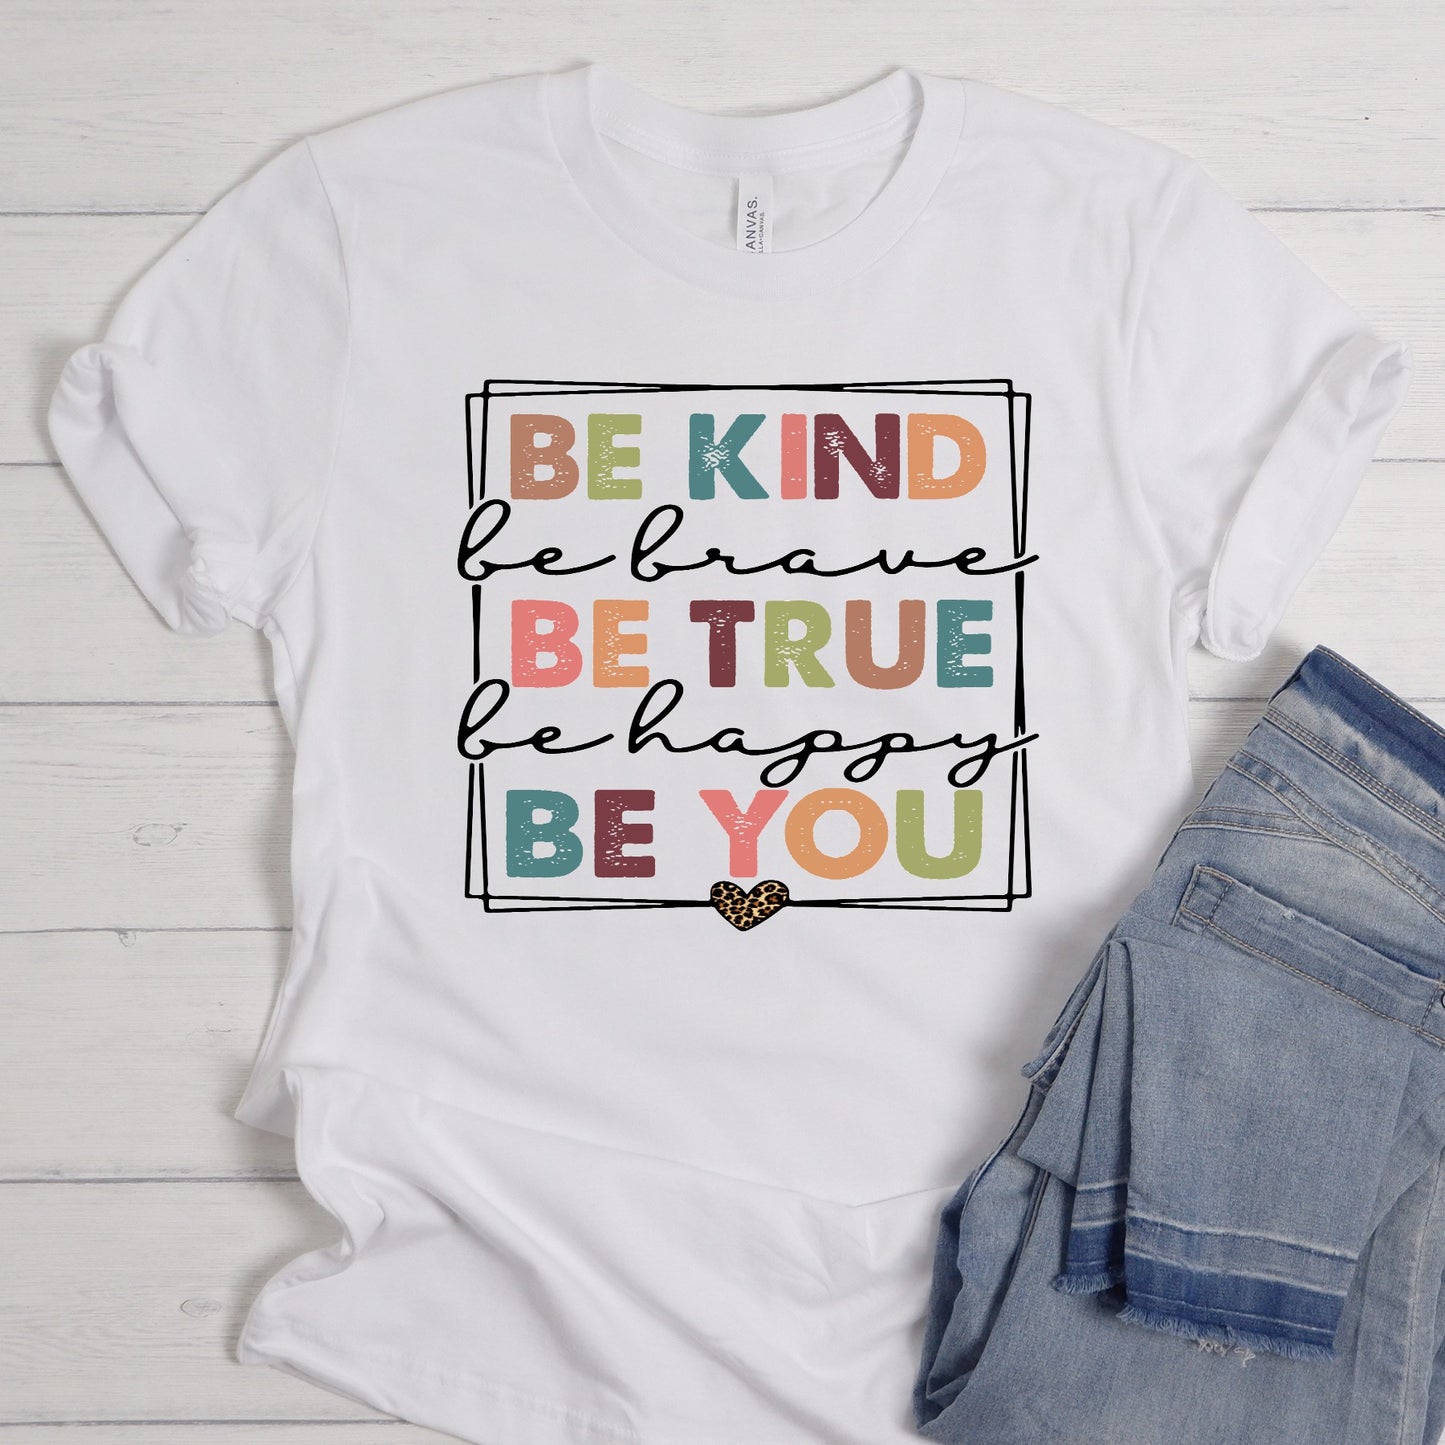 Be Kind, Be Brave... Be You